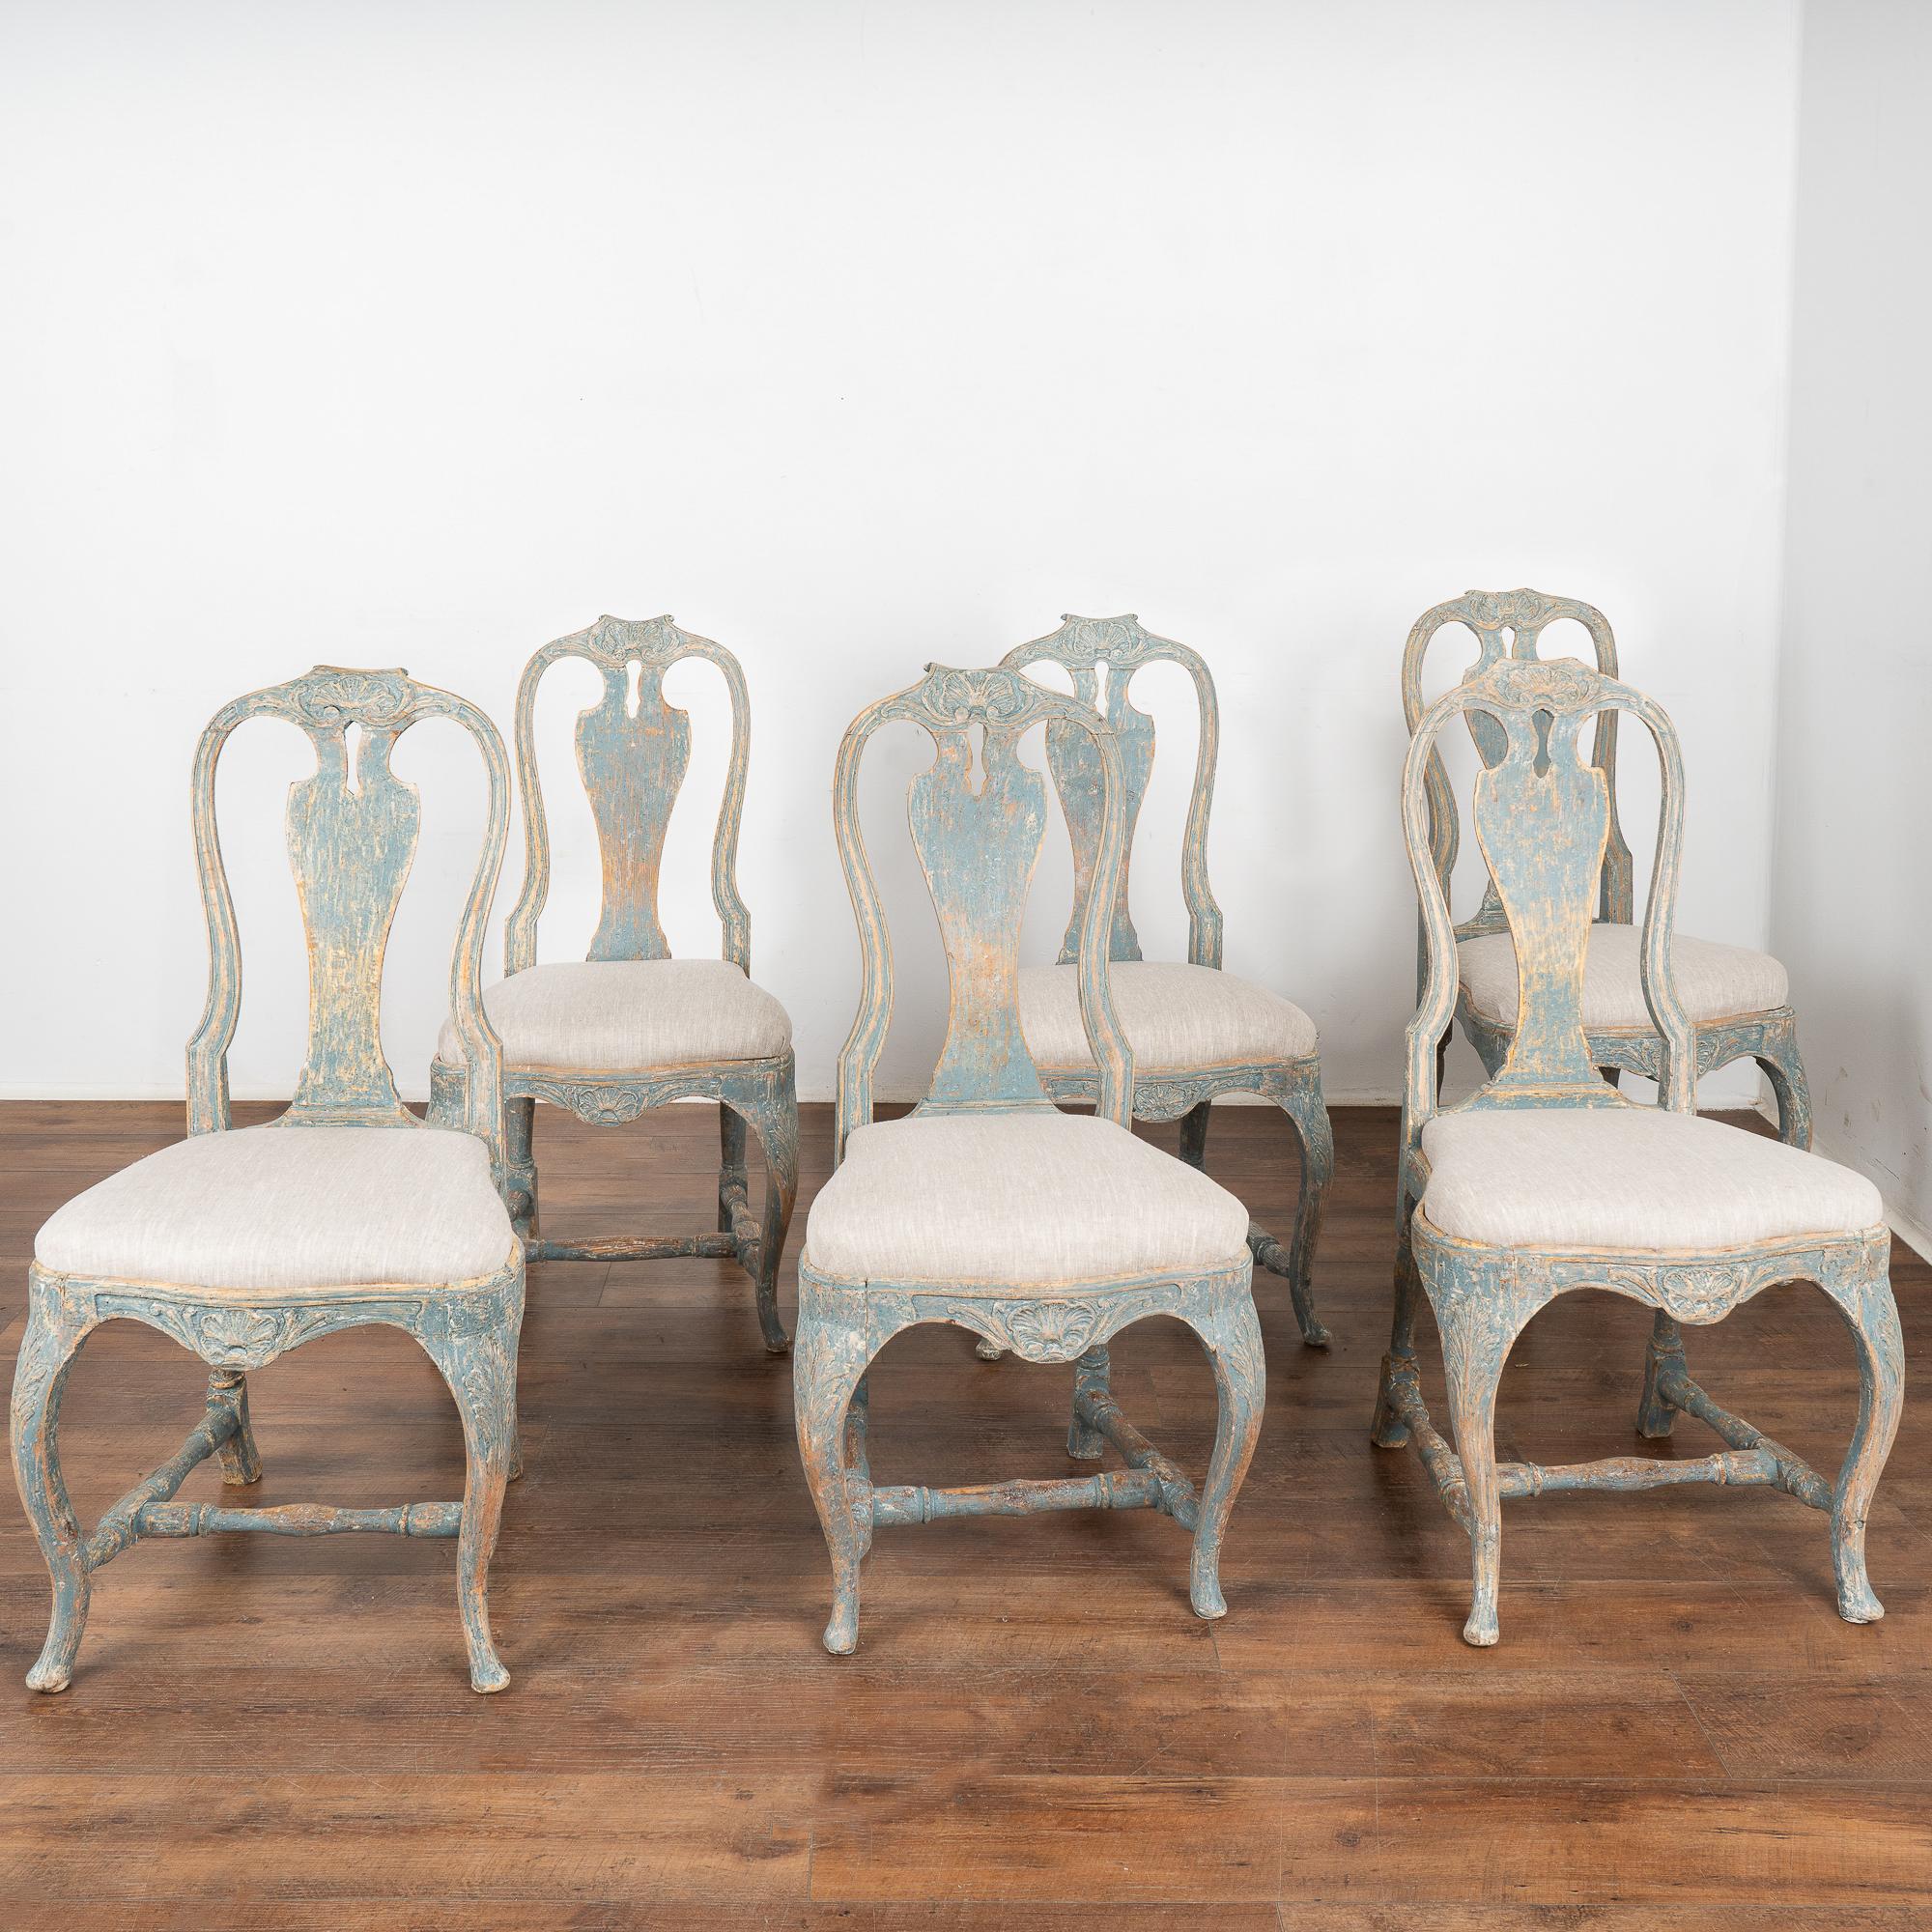 Set of 6 lovely Swedish rococo dining chairs with curved cabriolet legs and carved accents. 
Newer professionally applied custom layered blue painted finish with white undertones has been lightly rubbed and perfectly distressed to fit the age of